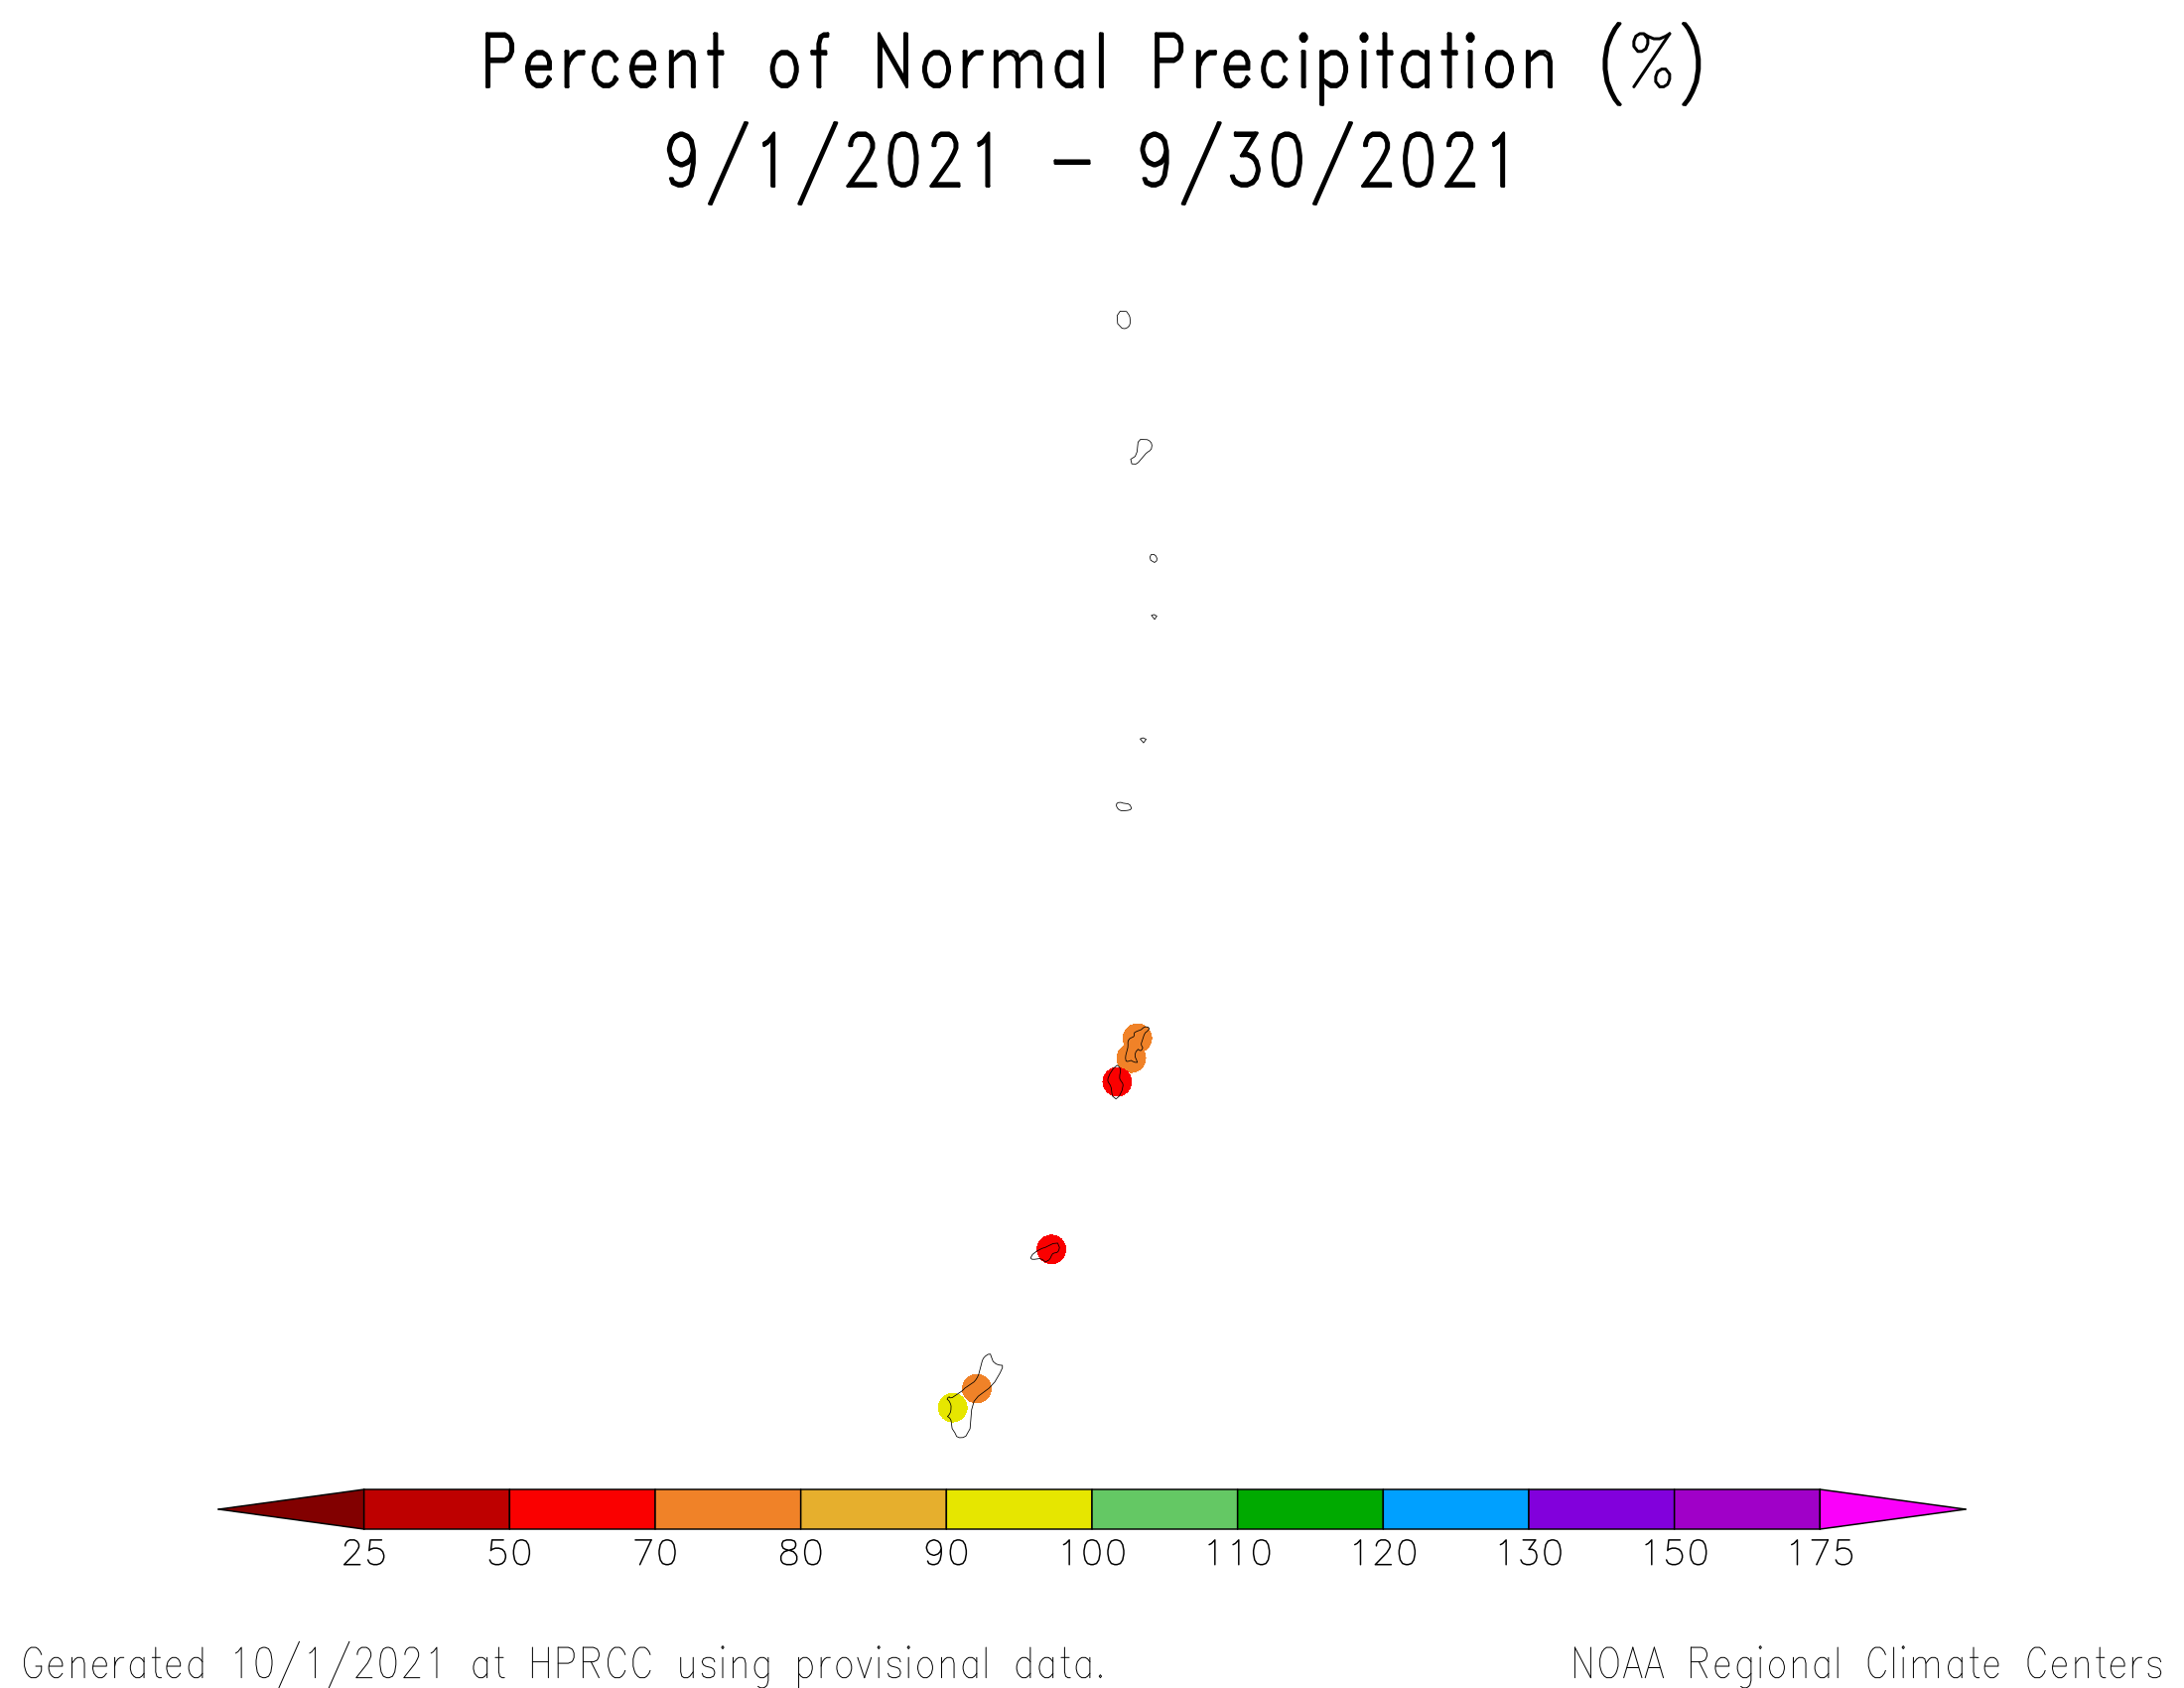 1-month Percent of Normal Precipitation for the Marianas